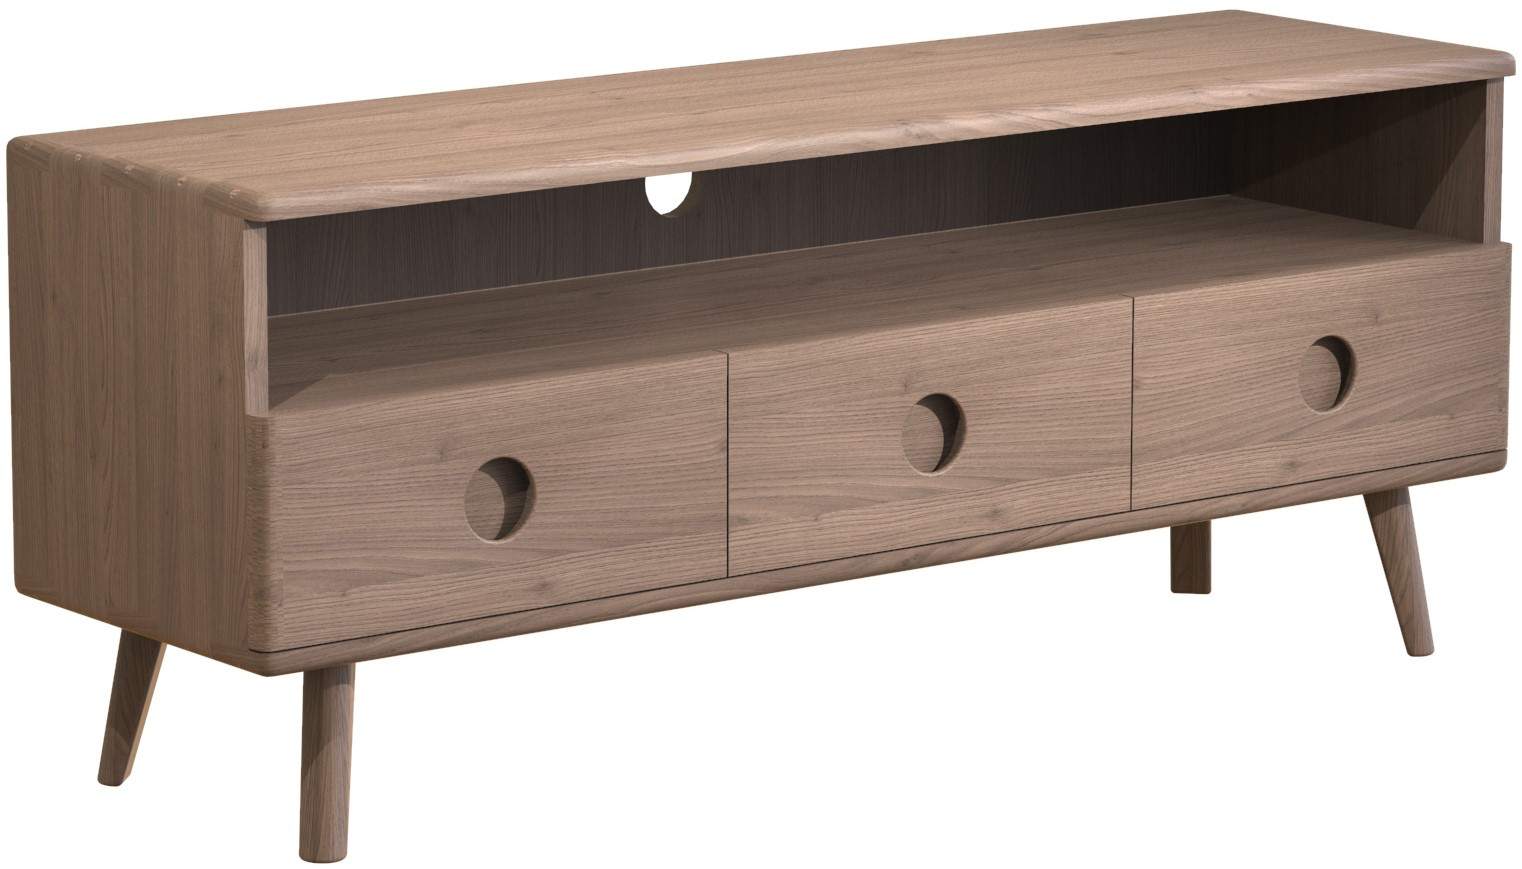 Carlton Furniture Holcot Media Unit with Drawers